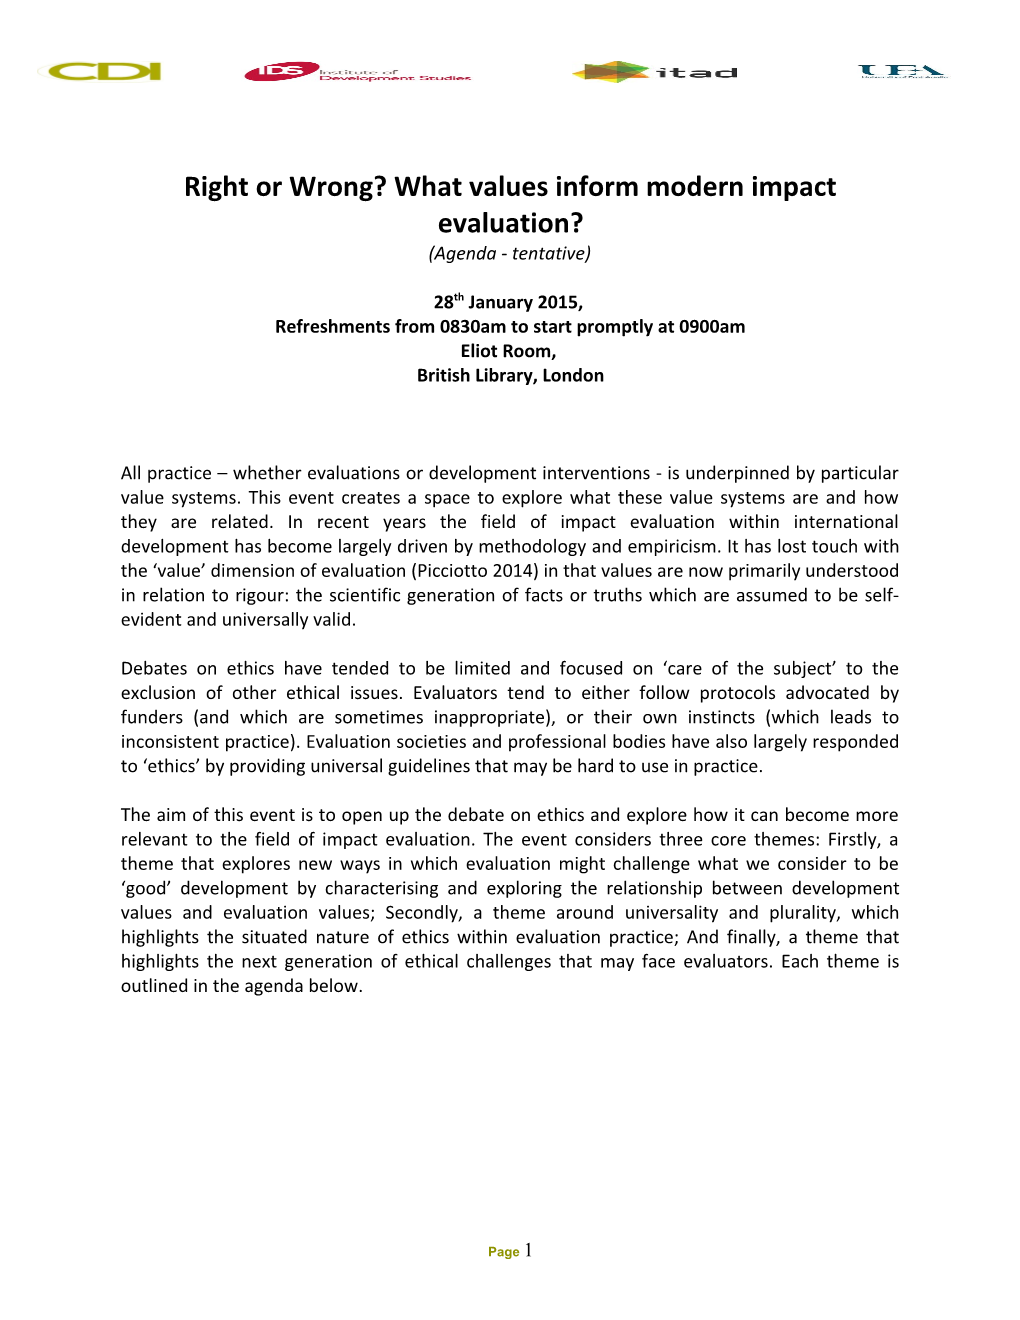 Right Or Wrong?What Values Inform Modern Impact Evaluation?